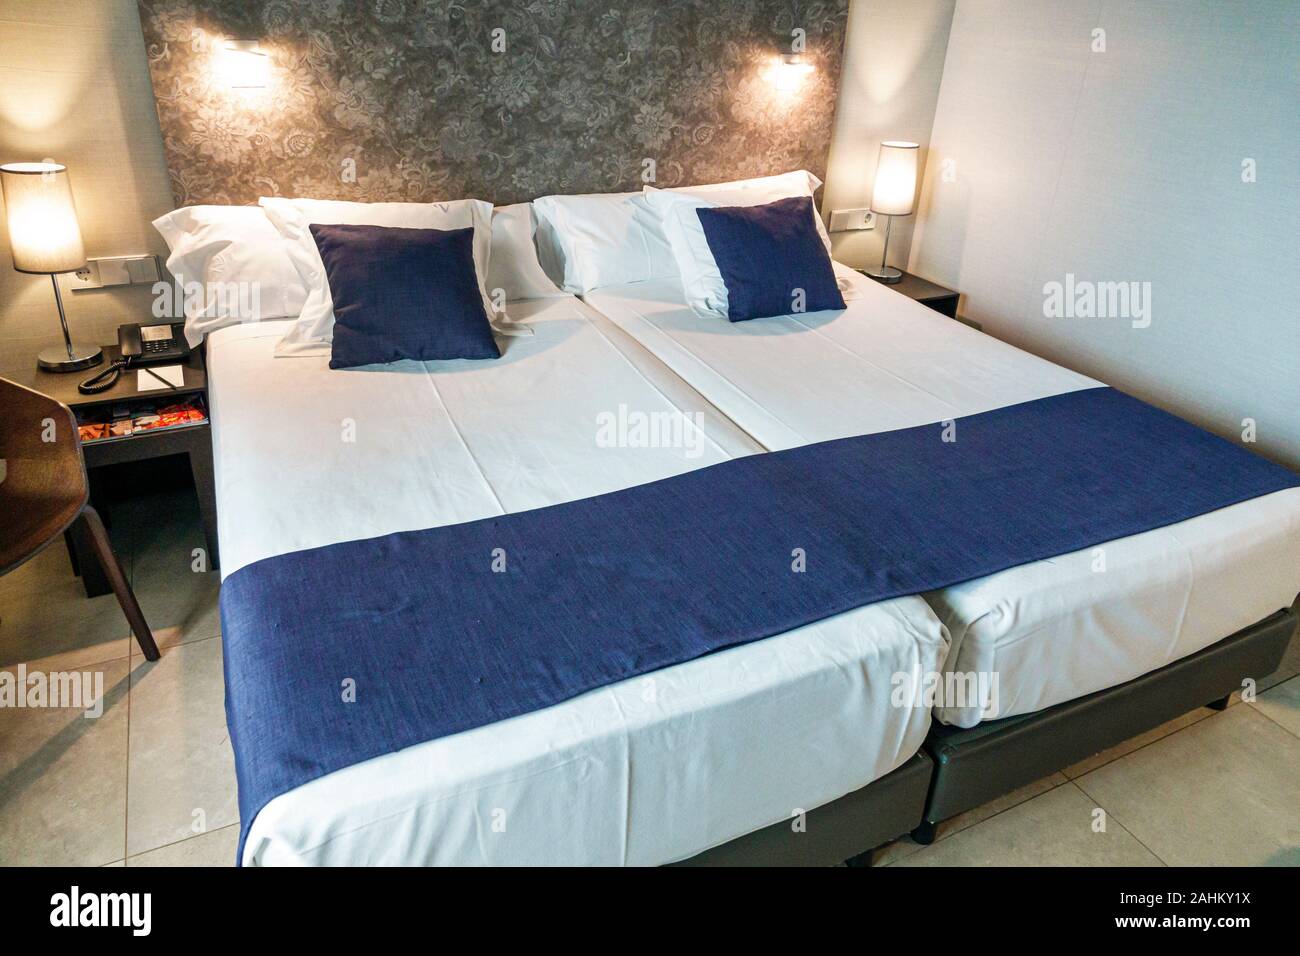 Valencia Spain Hispanic,Ciutat Vella,old city,historic district,Vincci Mercat,hotel,guest room,bed,twin beds joined together,bedding,ES190827063 Stock Photo